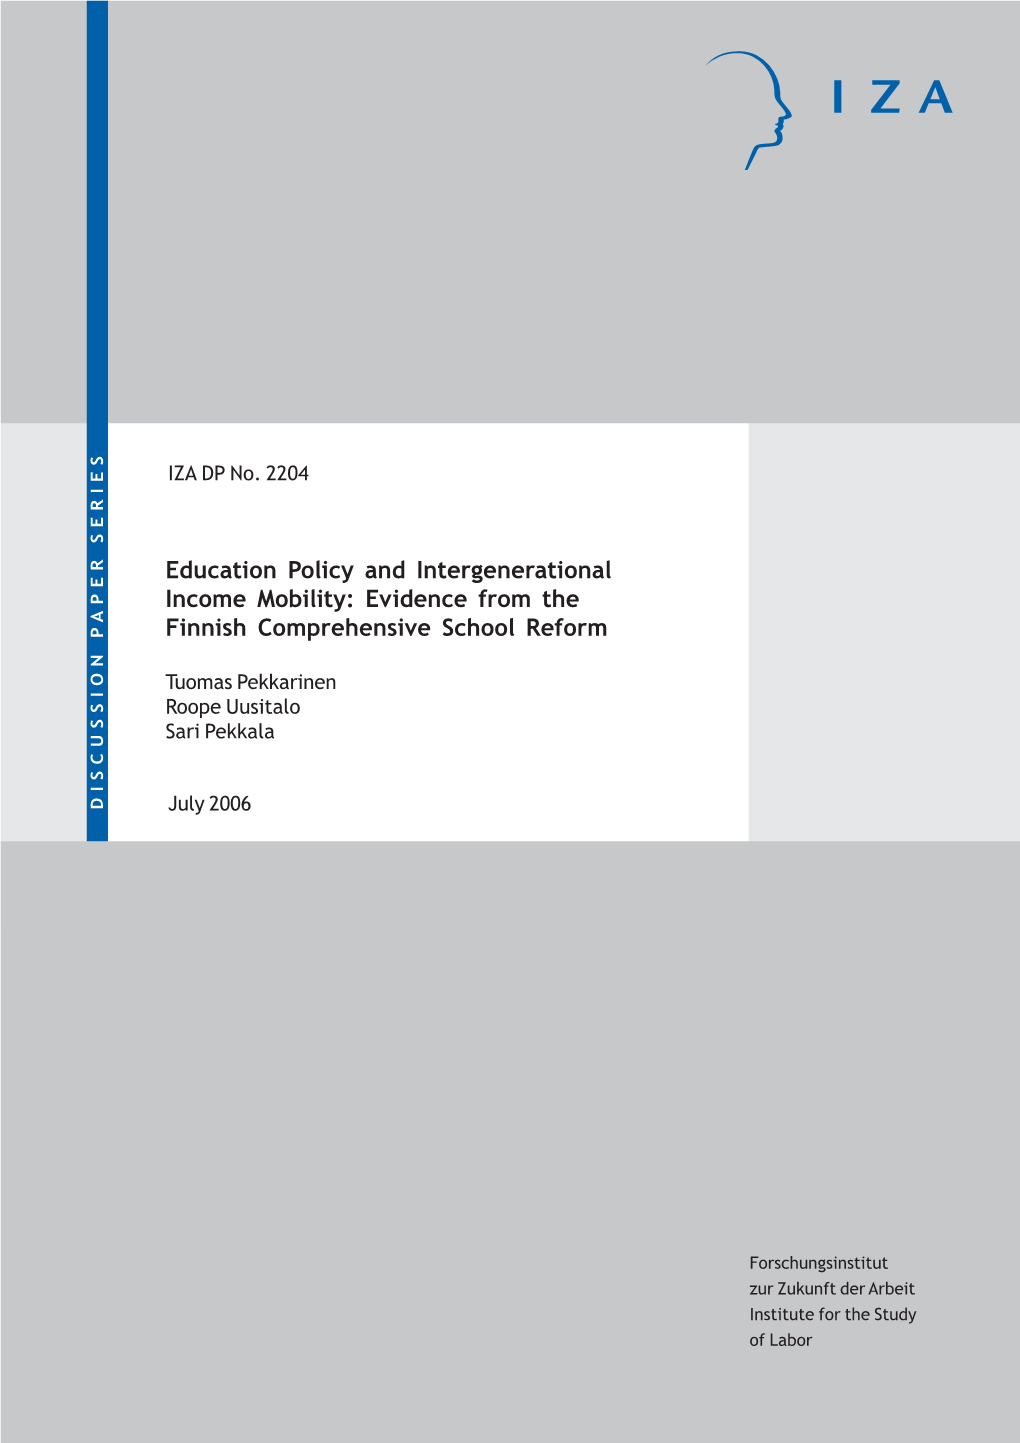 Education Policy and Intergenerational Income Mobility: Evidence from the Finnish Comprehensive School Reform